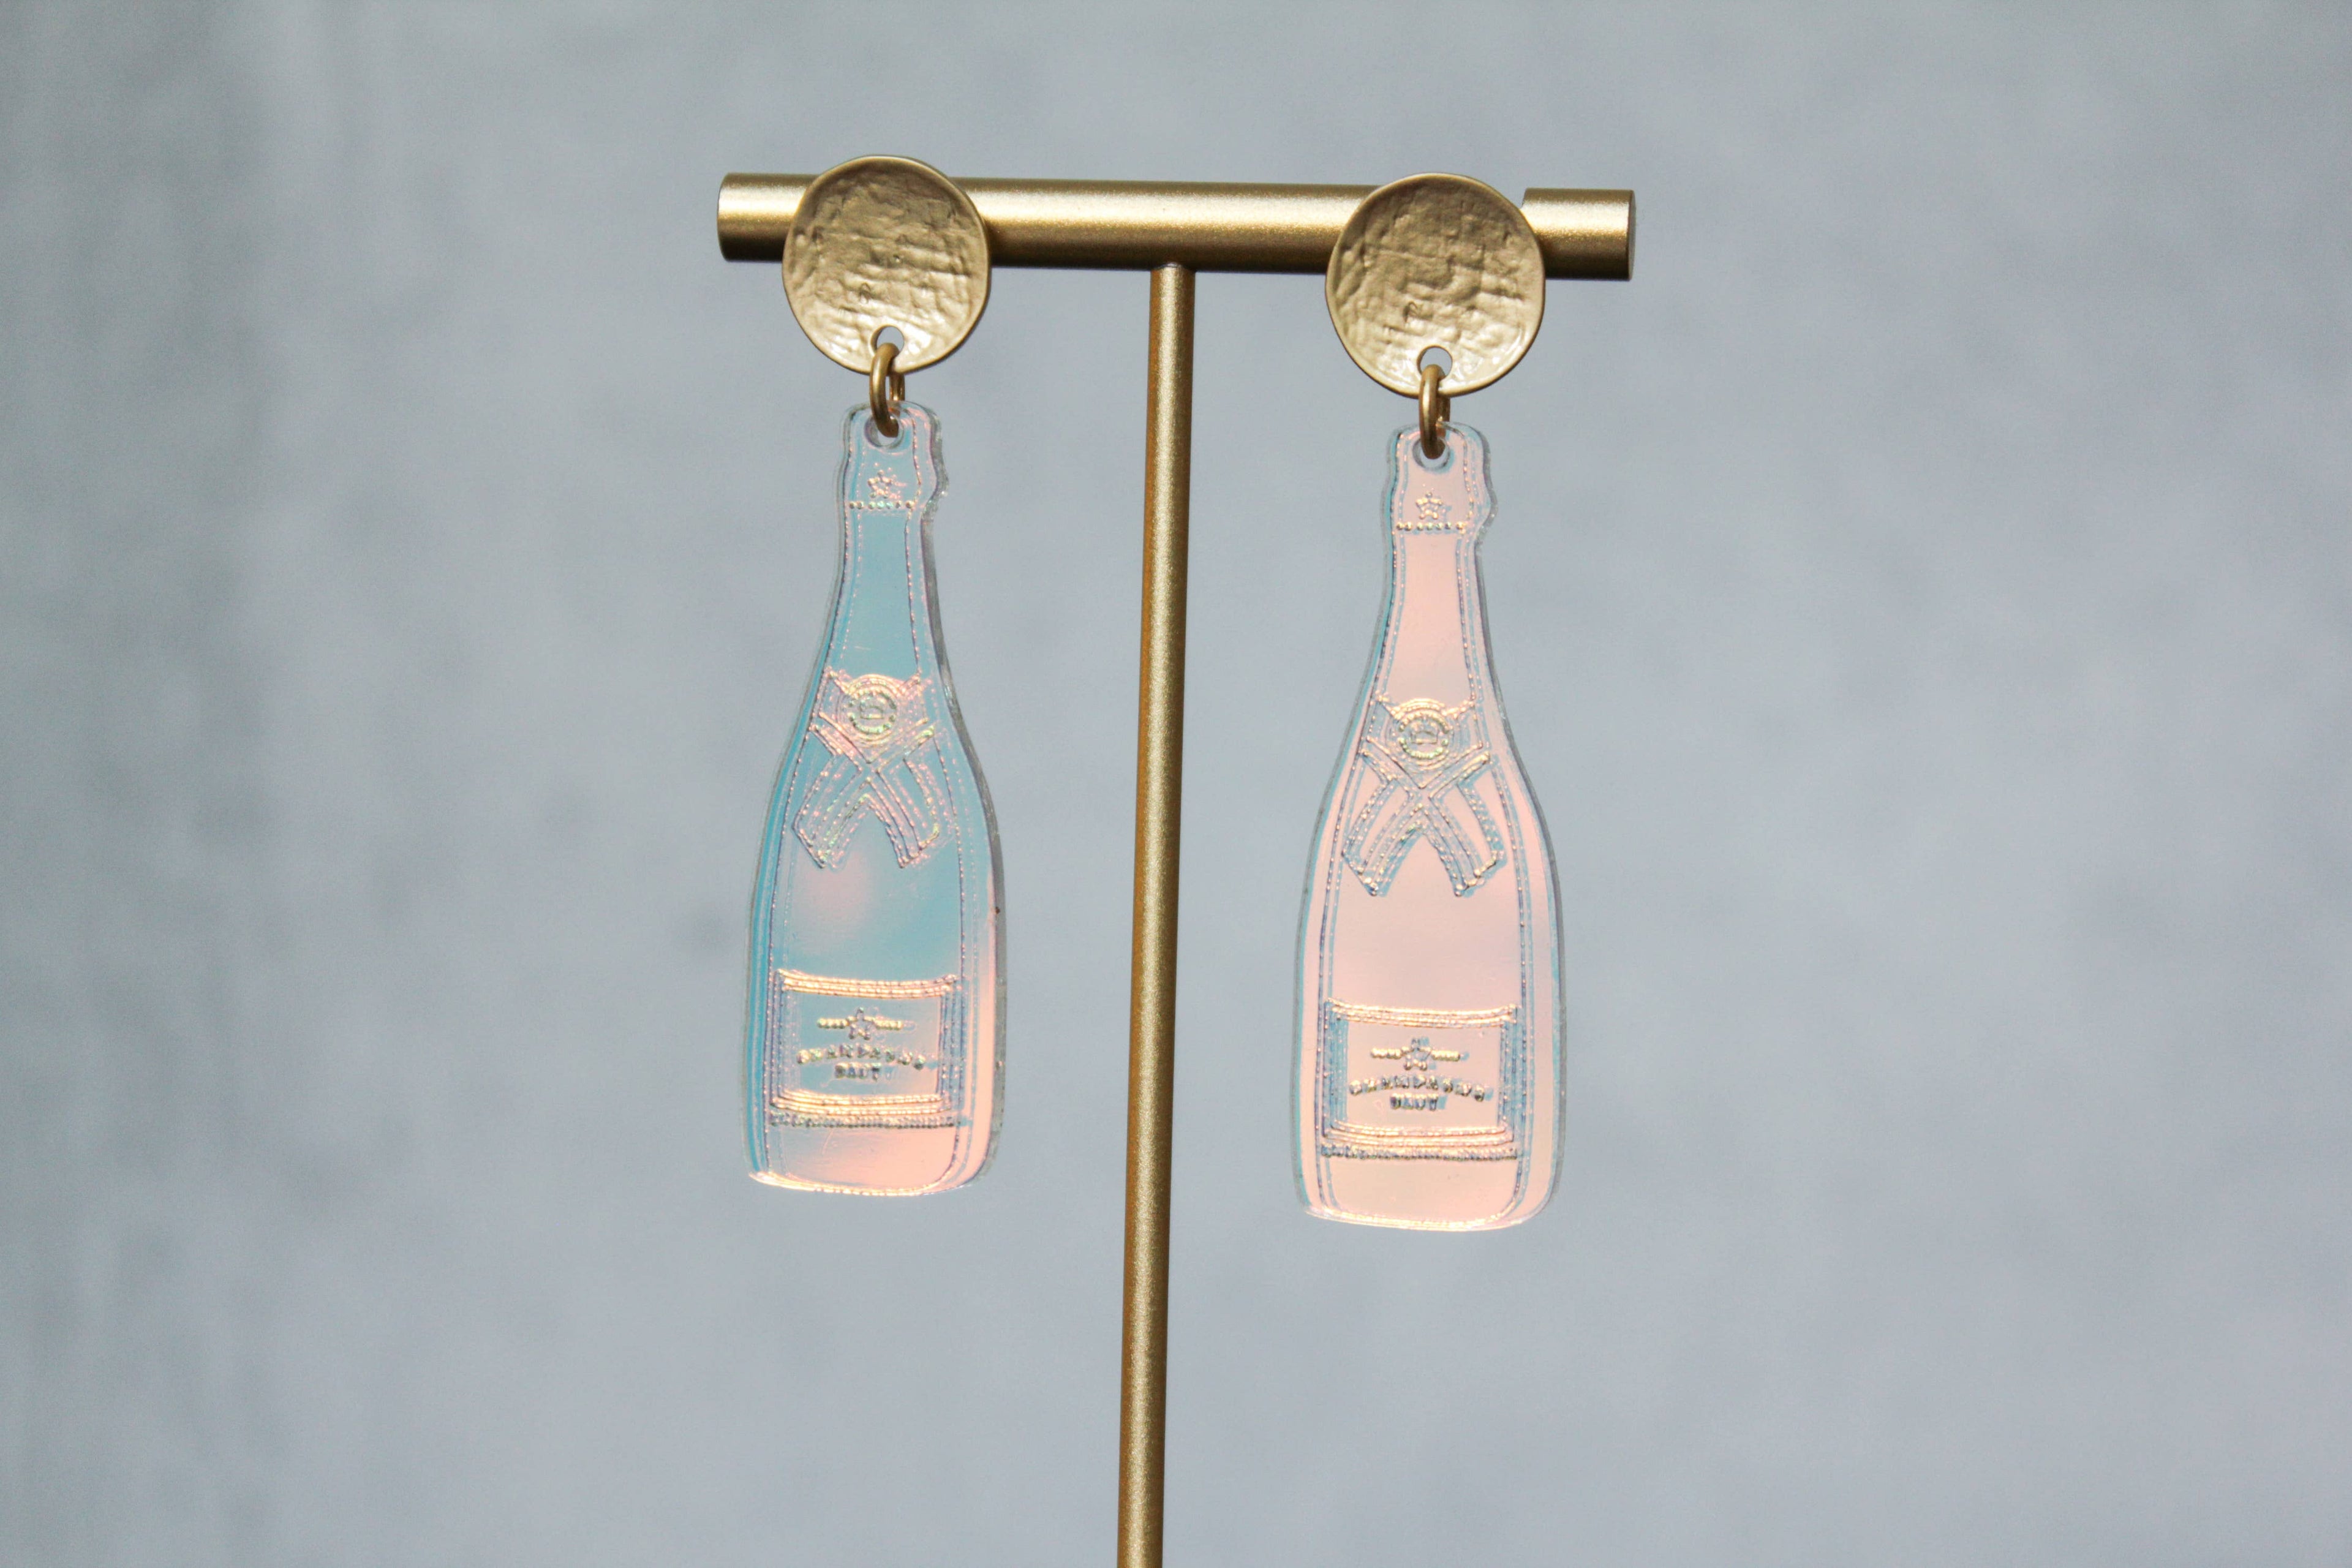 Iridescent Champagne Bottle Earrings - So &amp; Sew Boutique